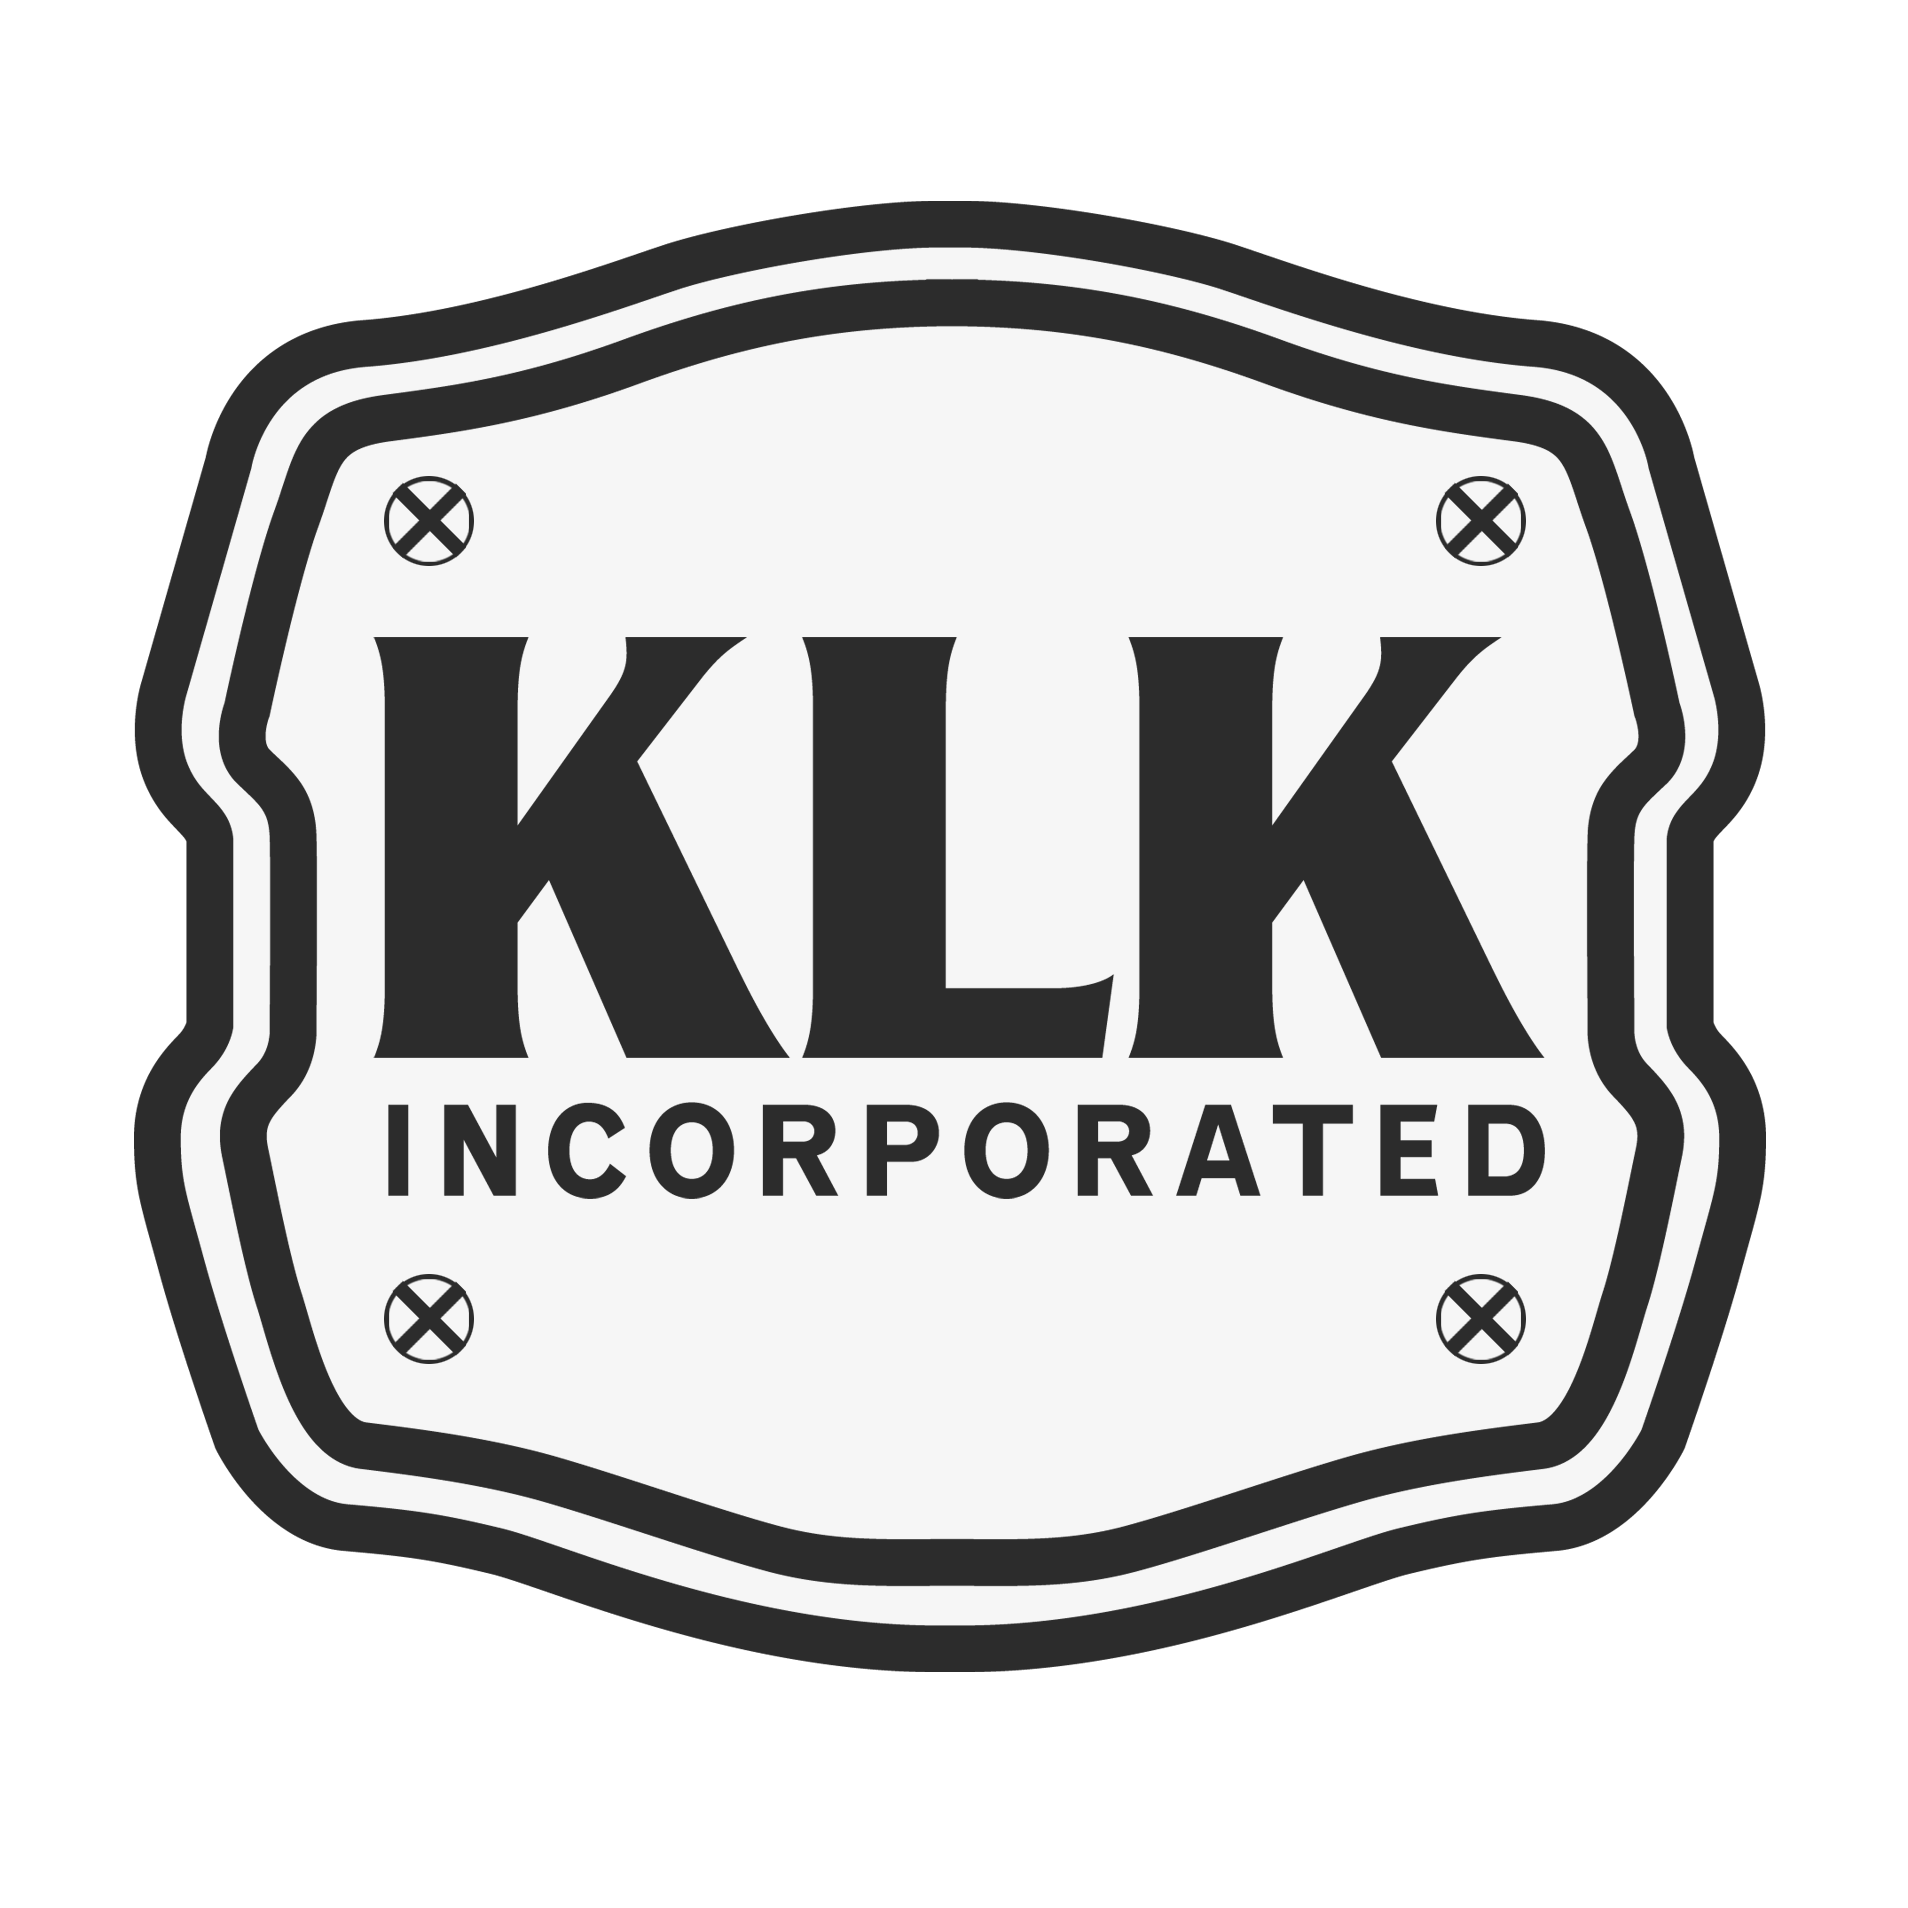 Klk Incorporated logo on a black background in the header.